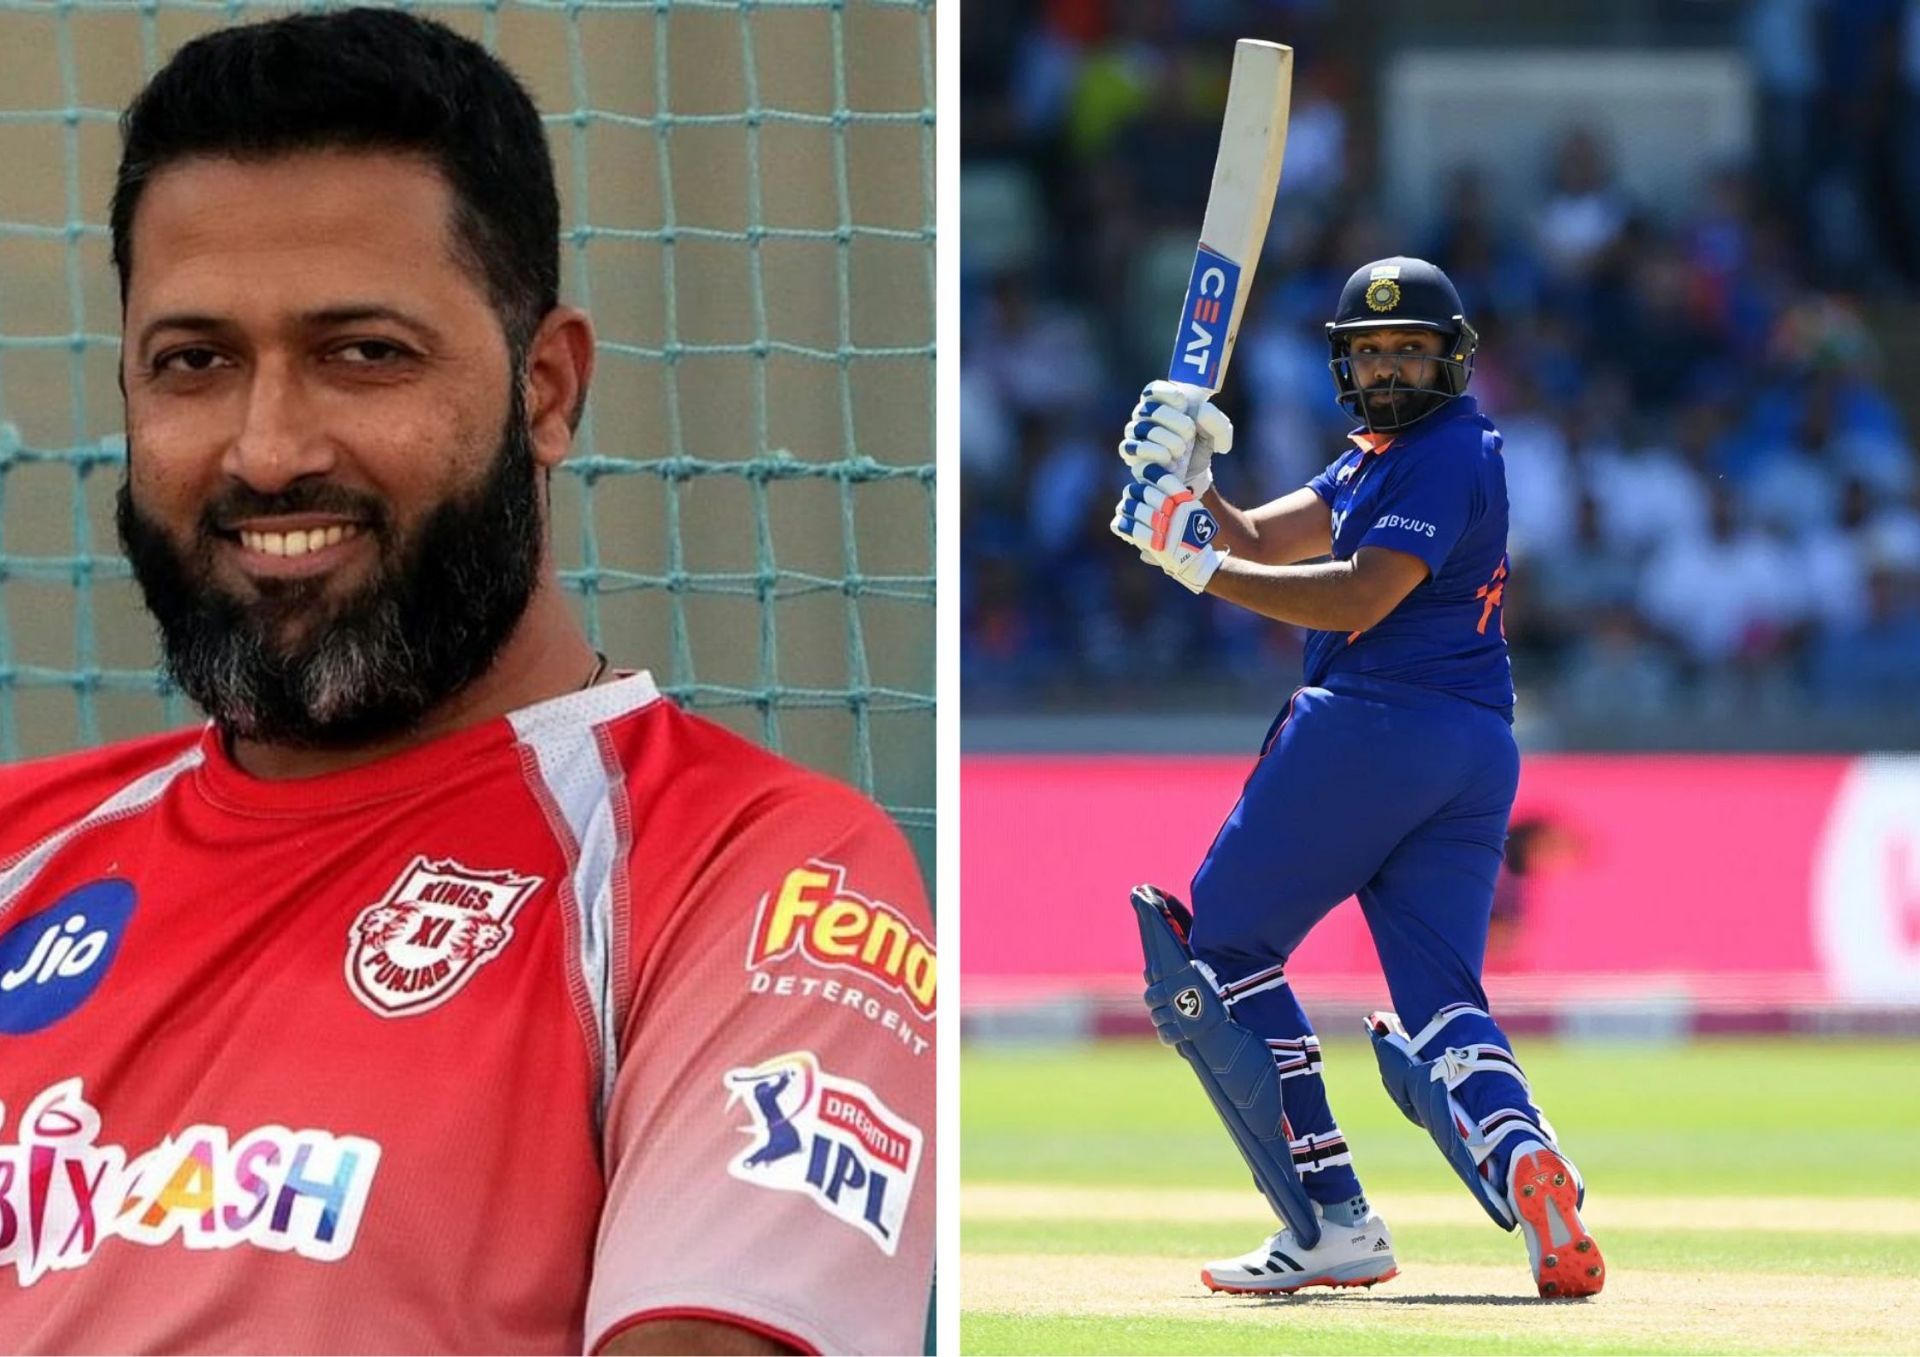 Wasim Jaffer reckons Rohit Sharma can consider batting at 4, opening a spot for Rishabh Pant at the top of the order (Picture Credits: Twitter/ Punjab Kings via Hindustan Times; Getty Images)